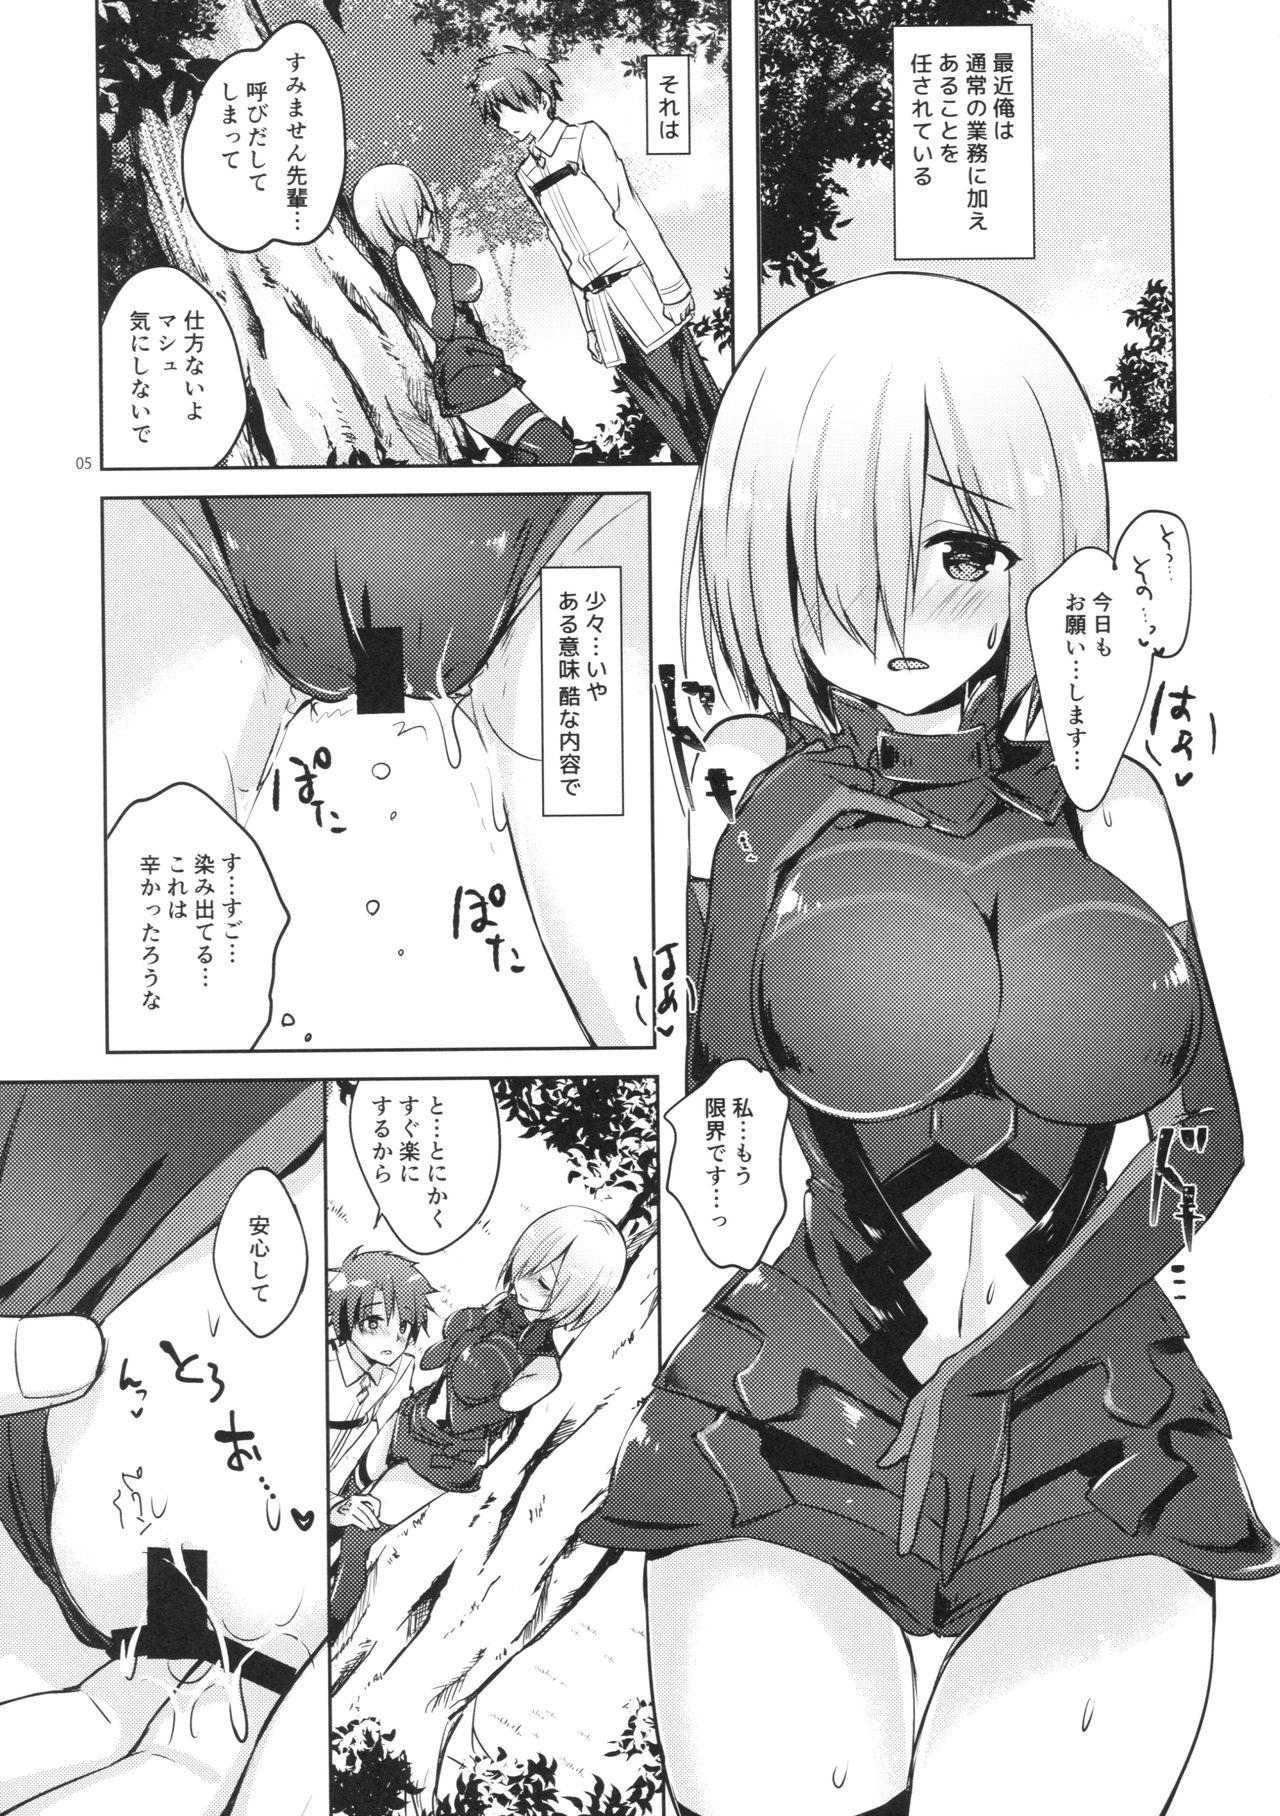 Cheating Mash/Hatsujou Order - Fate grand order Sextoys - Page 4